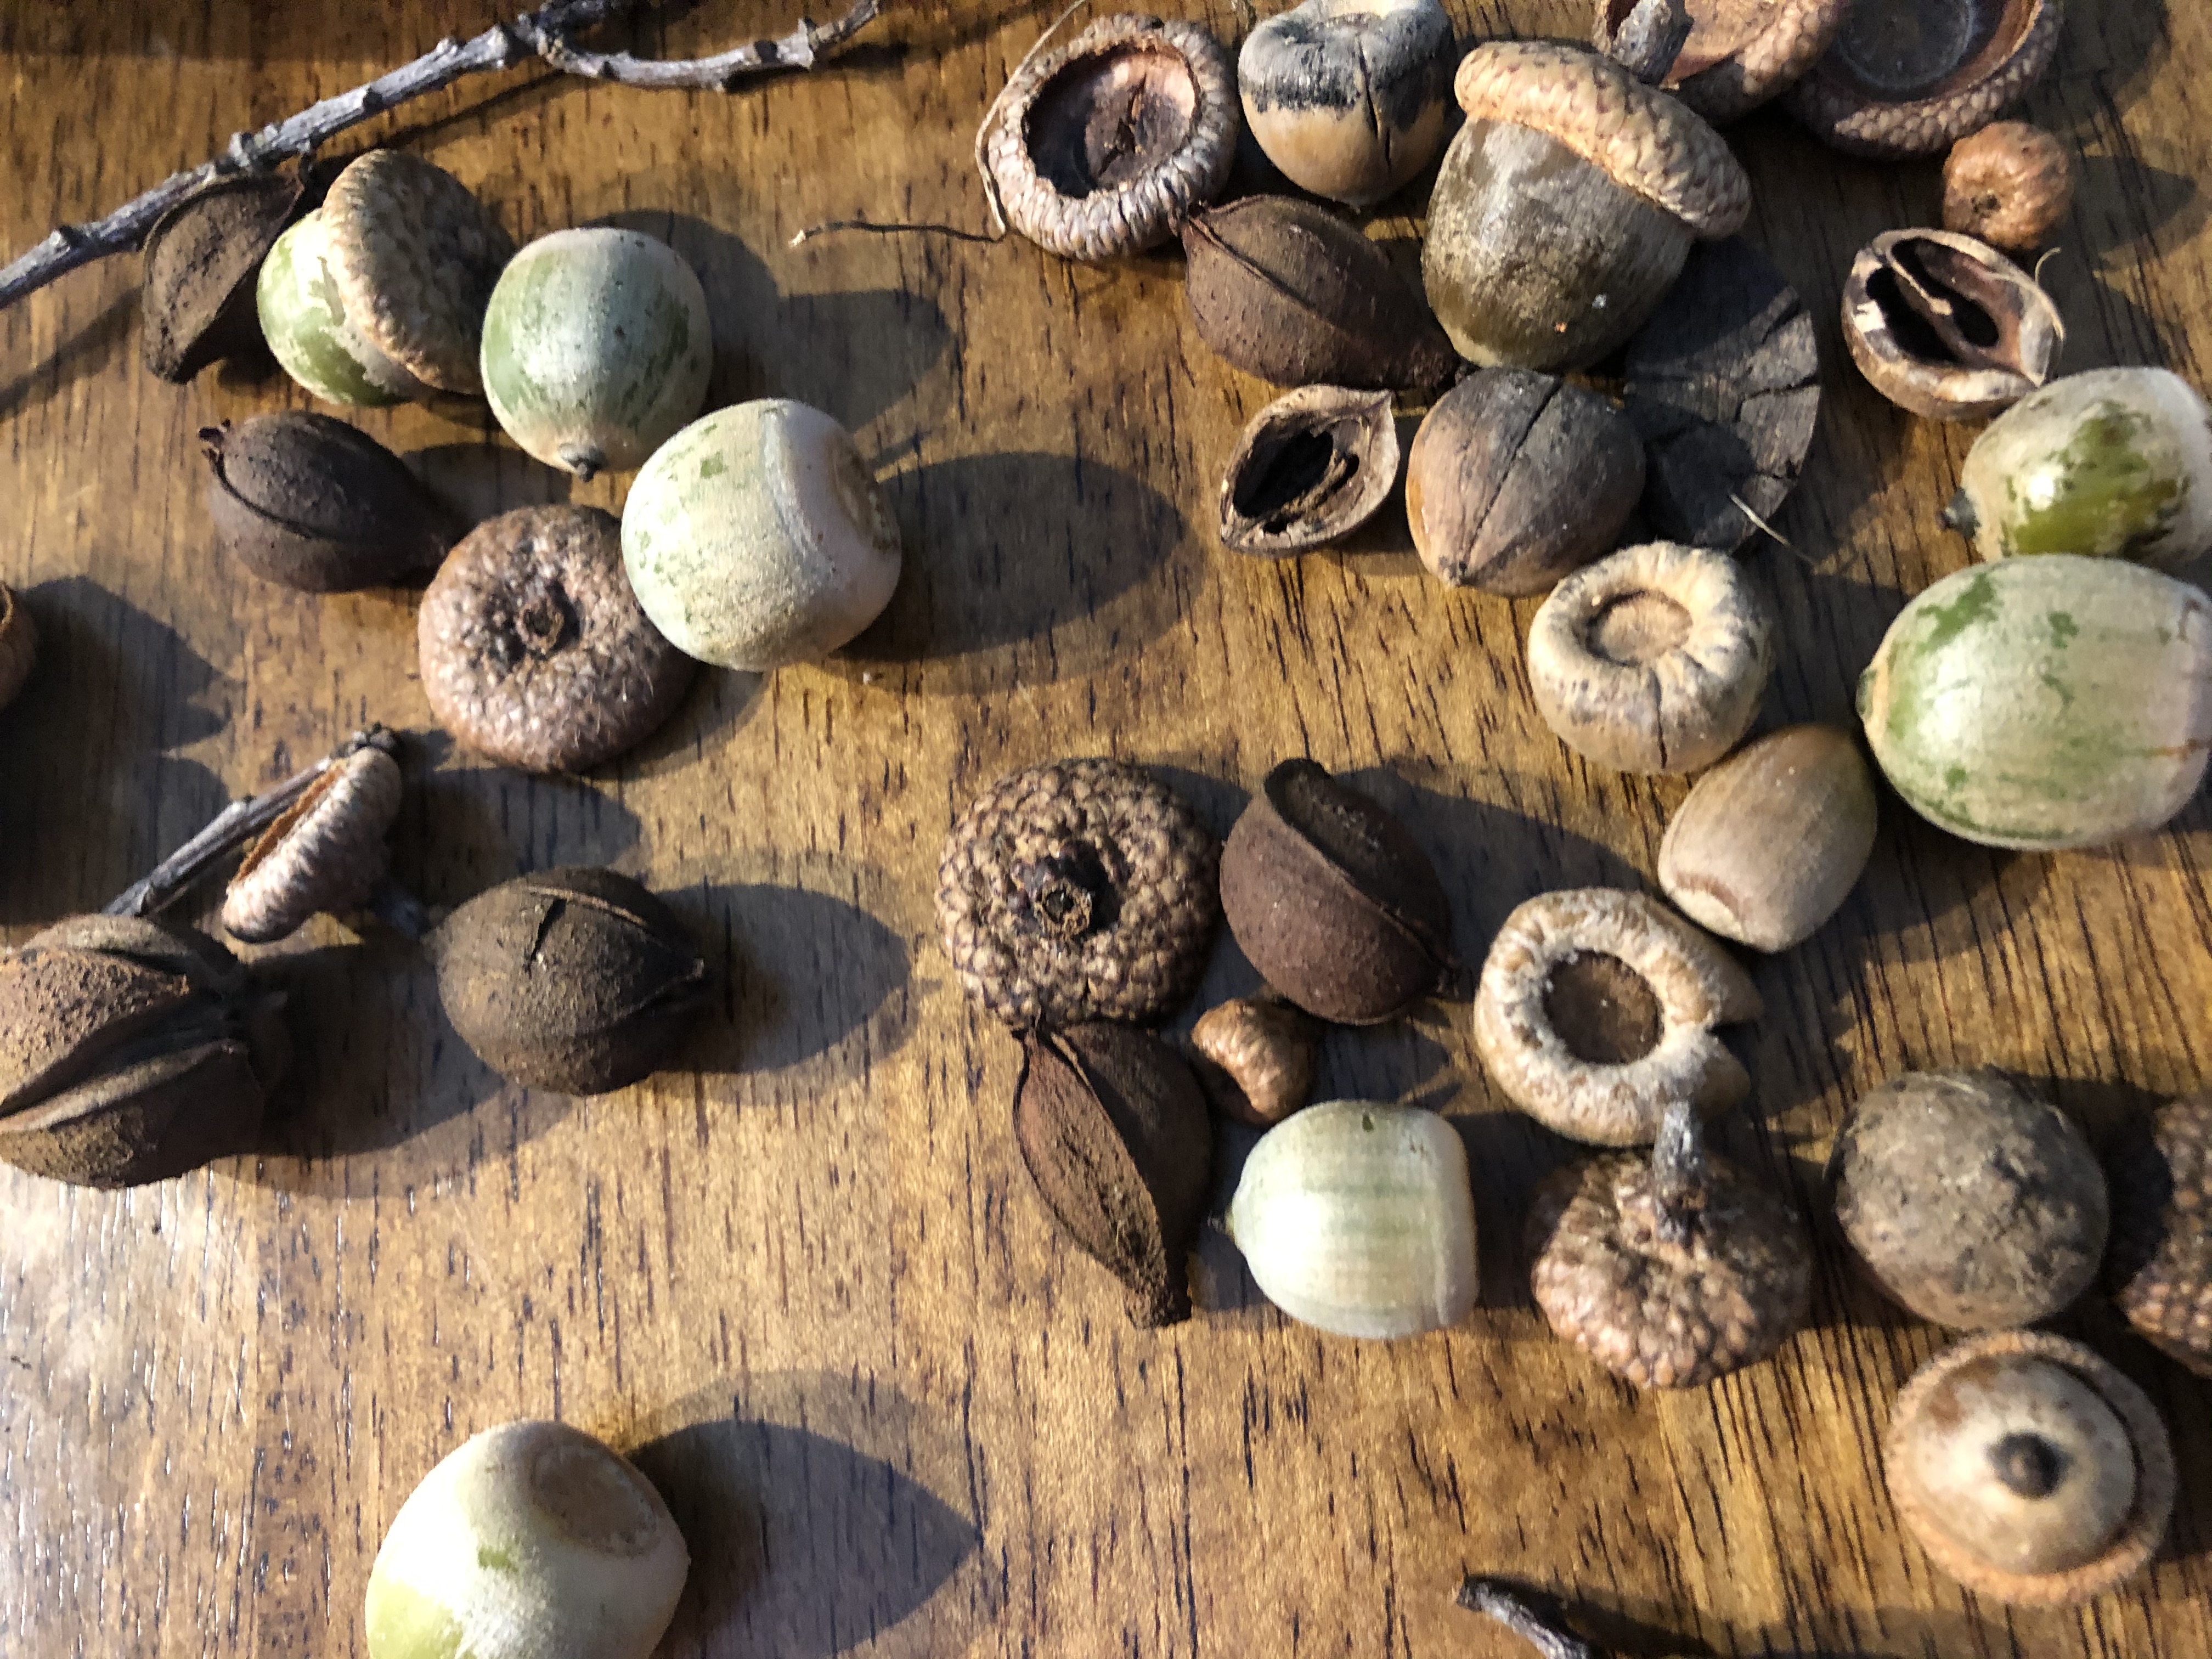 loose parts play: collection of acorns, nuts and sticks..